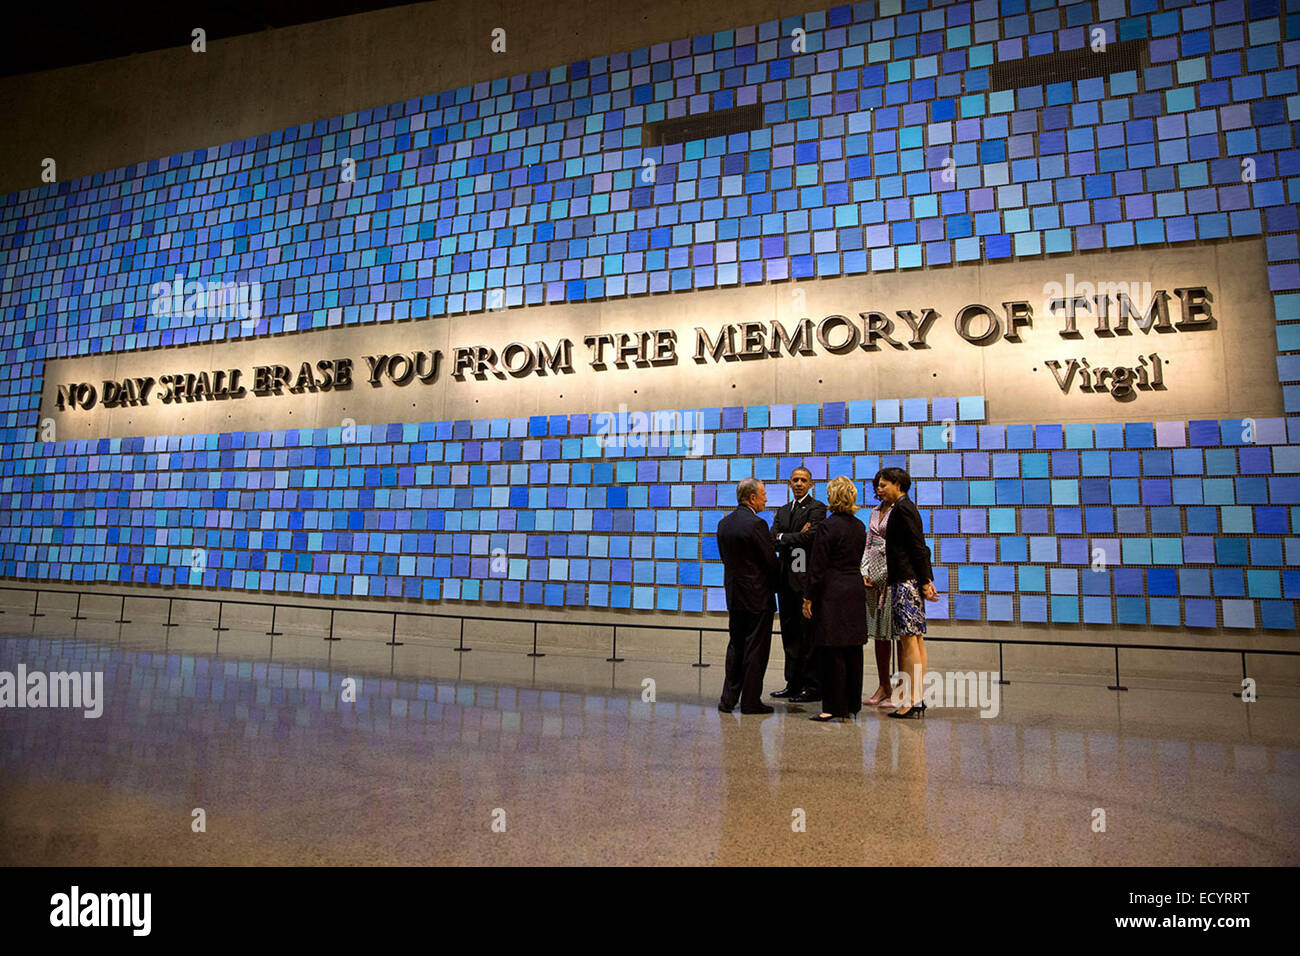 President Barack Obama and First Lady Michelle Obama talk with former New York City Mayor Michael Bloomberg, his partner Diana Taylor, and former Secretary of State Hillary Rodham Clinton as they stand near the Virgil Wall during a tour of the National September 11 Memorial & Museum, in New York, N.Y., May 15, 2014. Stock Photo